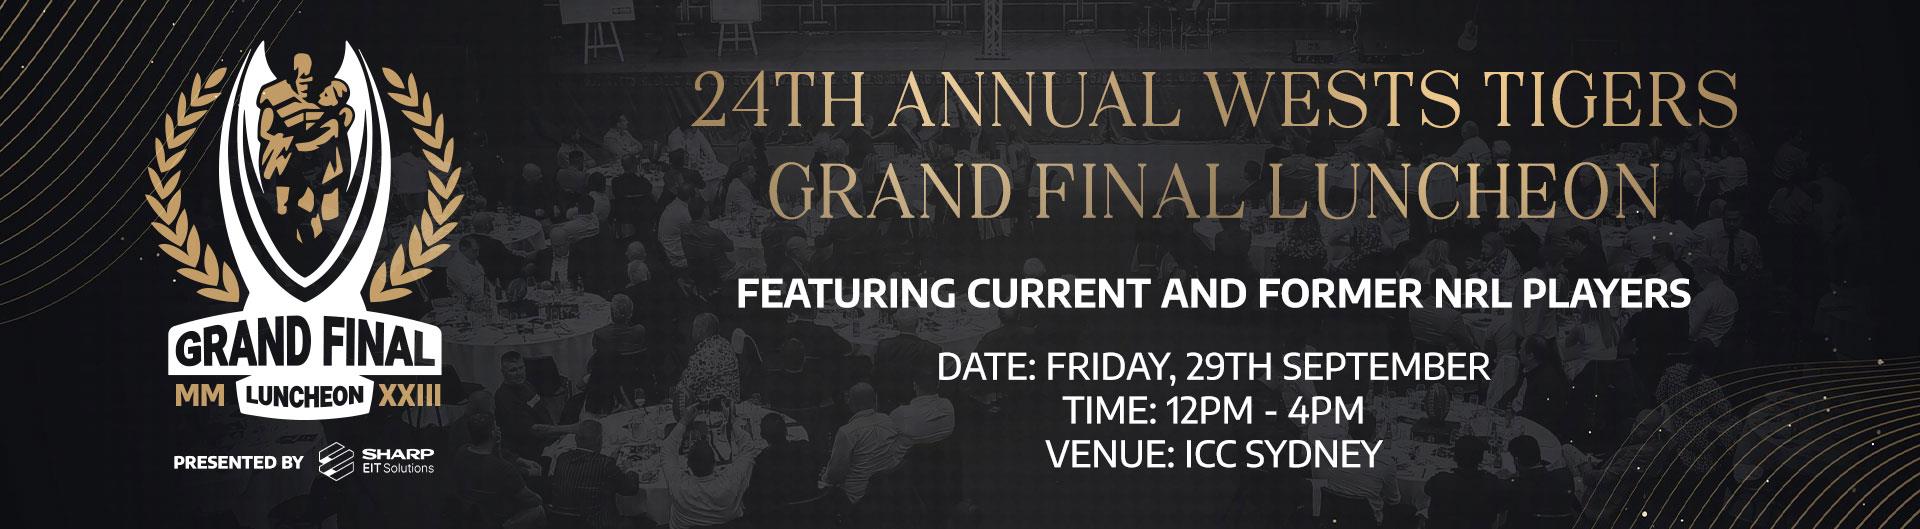 West Tigers Grand Final Luncheon is coming to ICC Sydney on 29 September 2023.